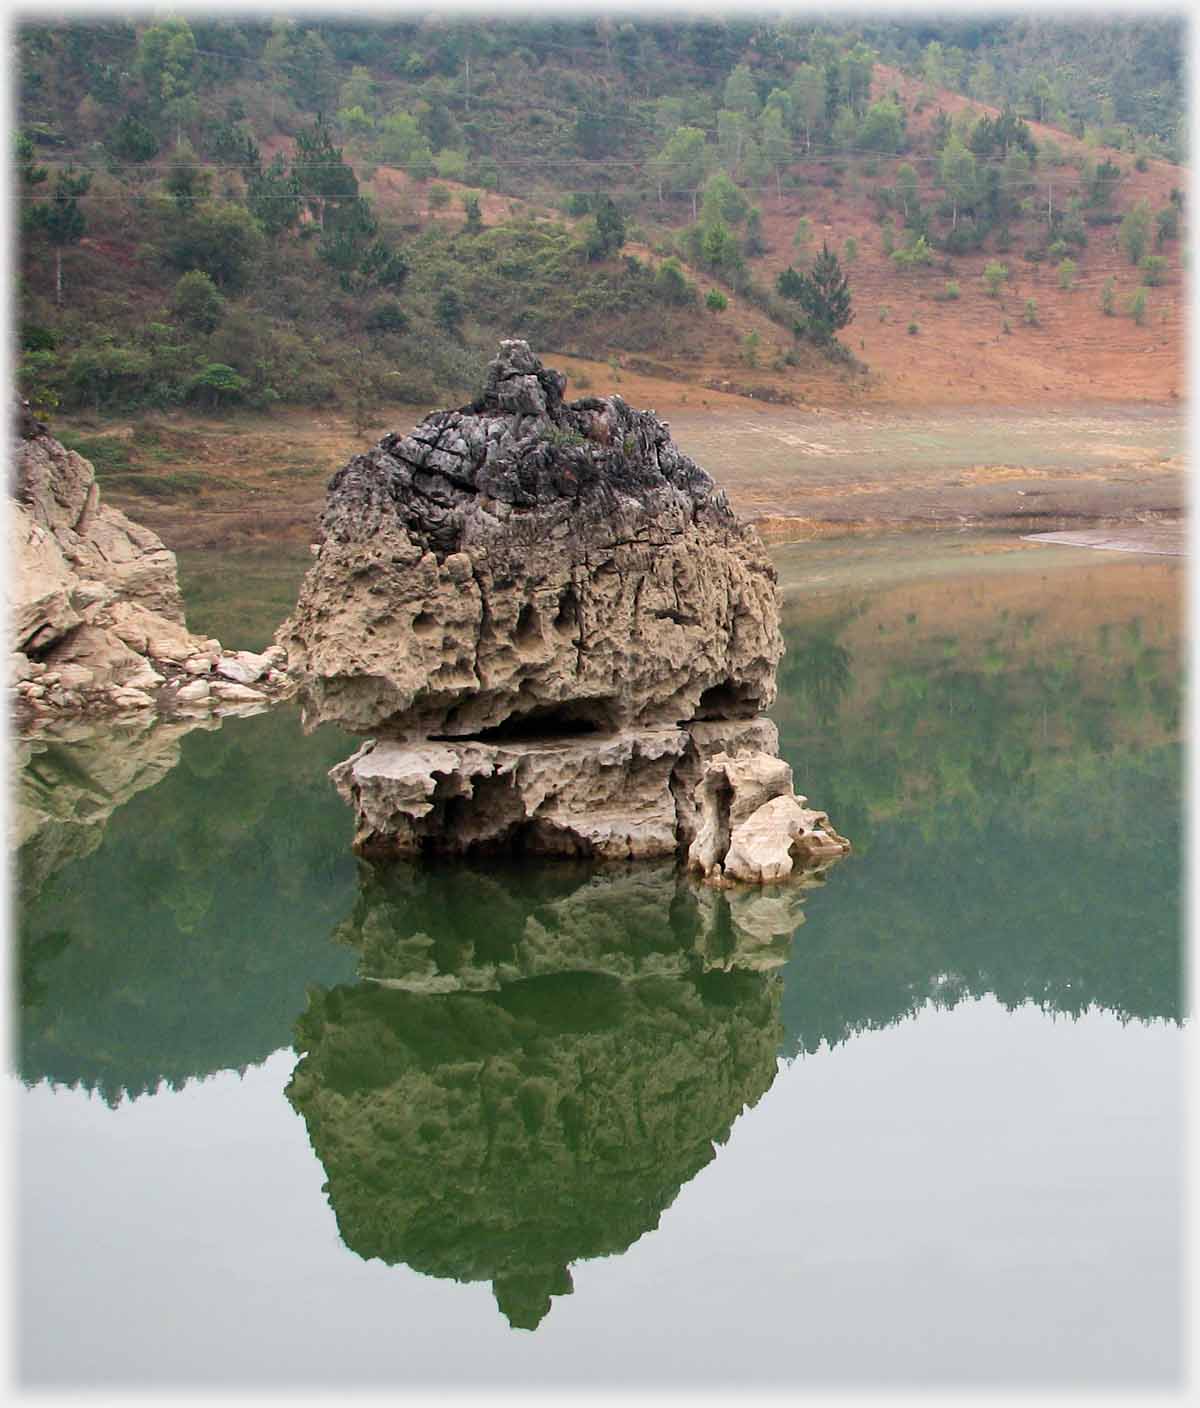 Much pitted rock standing in river with reflection.